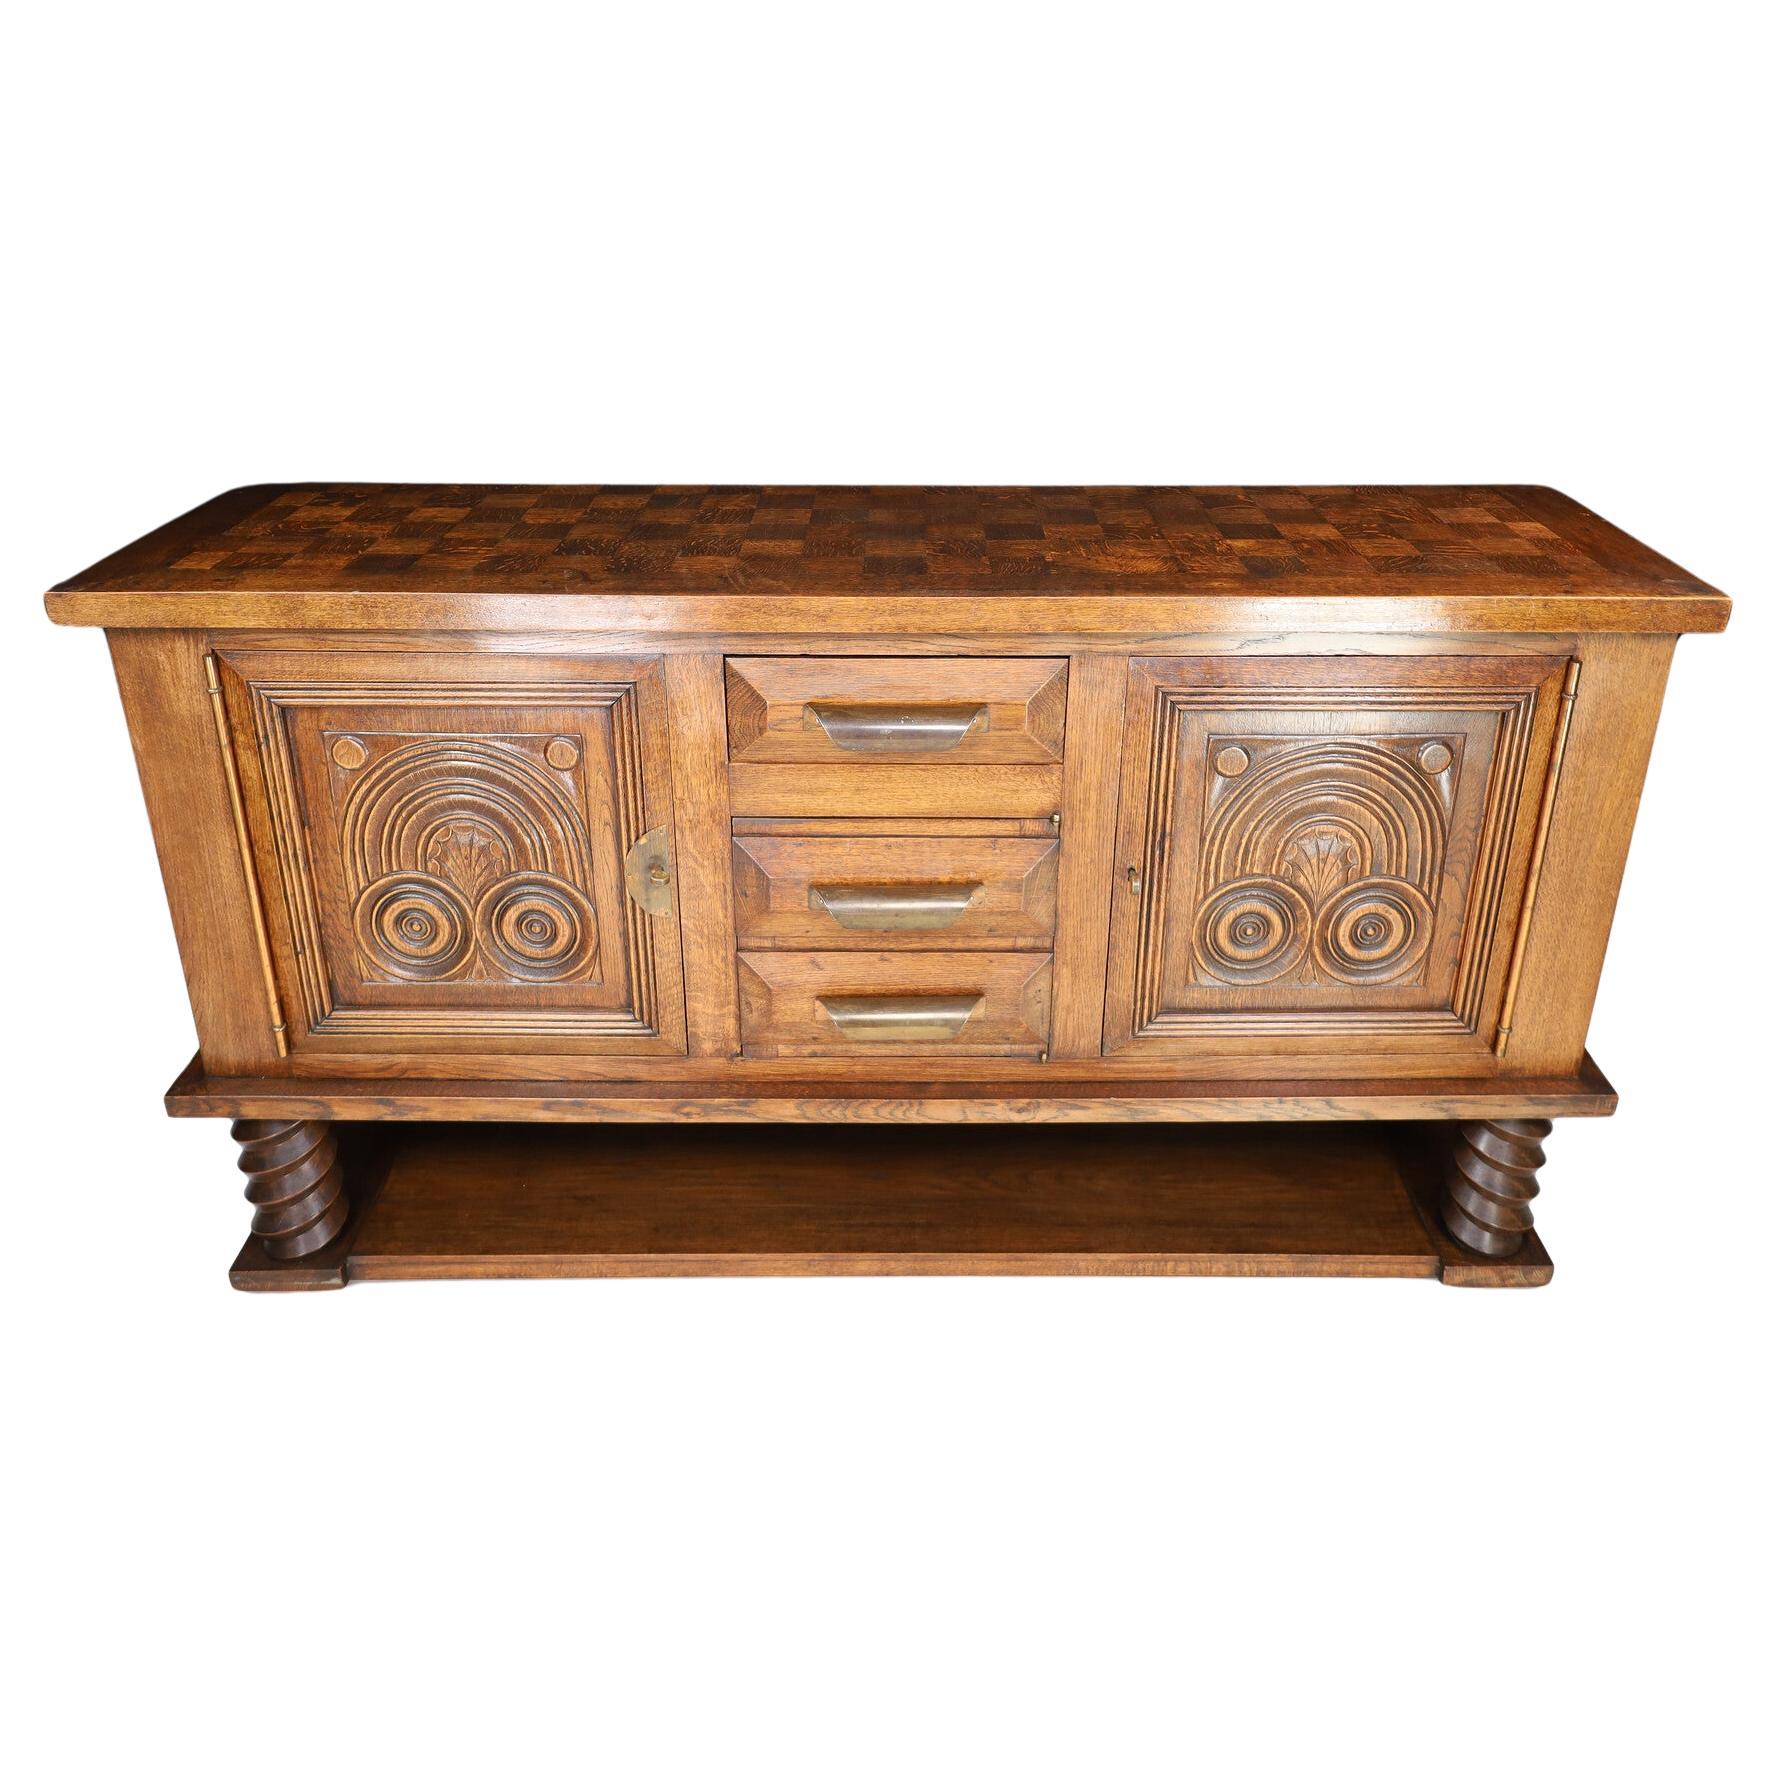 Here is a gorgeous oak Art Deco sideboard by Charles Dudouyt circa 1940s. The top is inlayed with stunning oak precise squares that comes together for a solid top that is a masterpiece. The open space below allows the true craftsmanship to shine